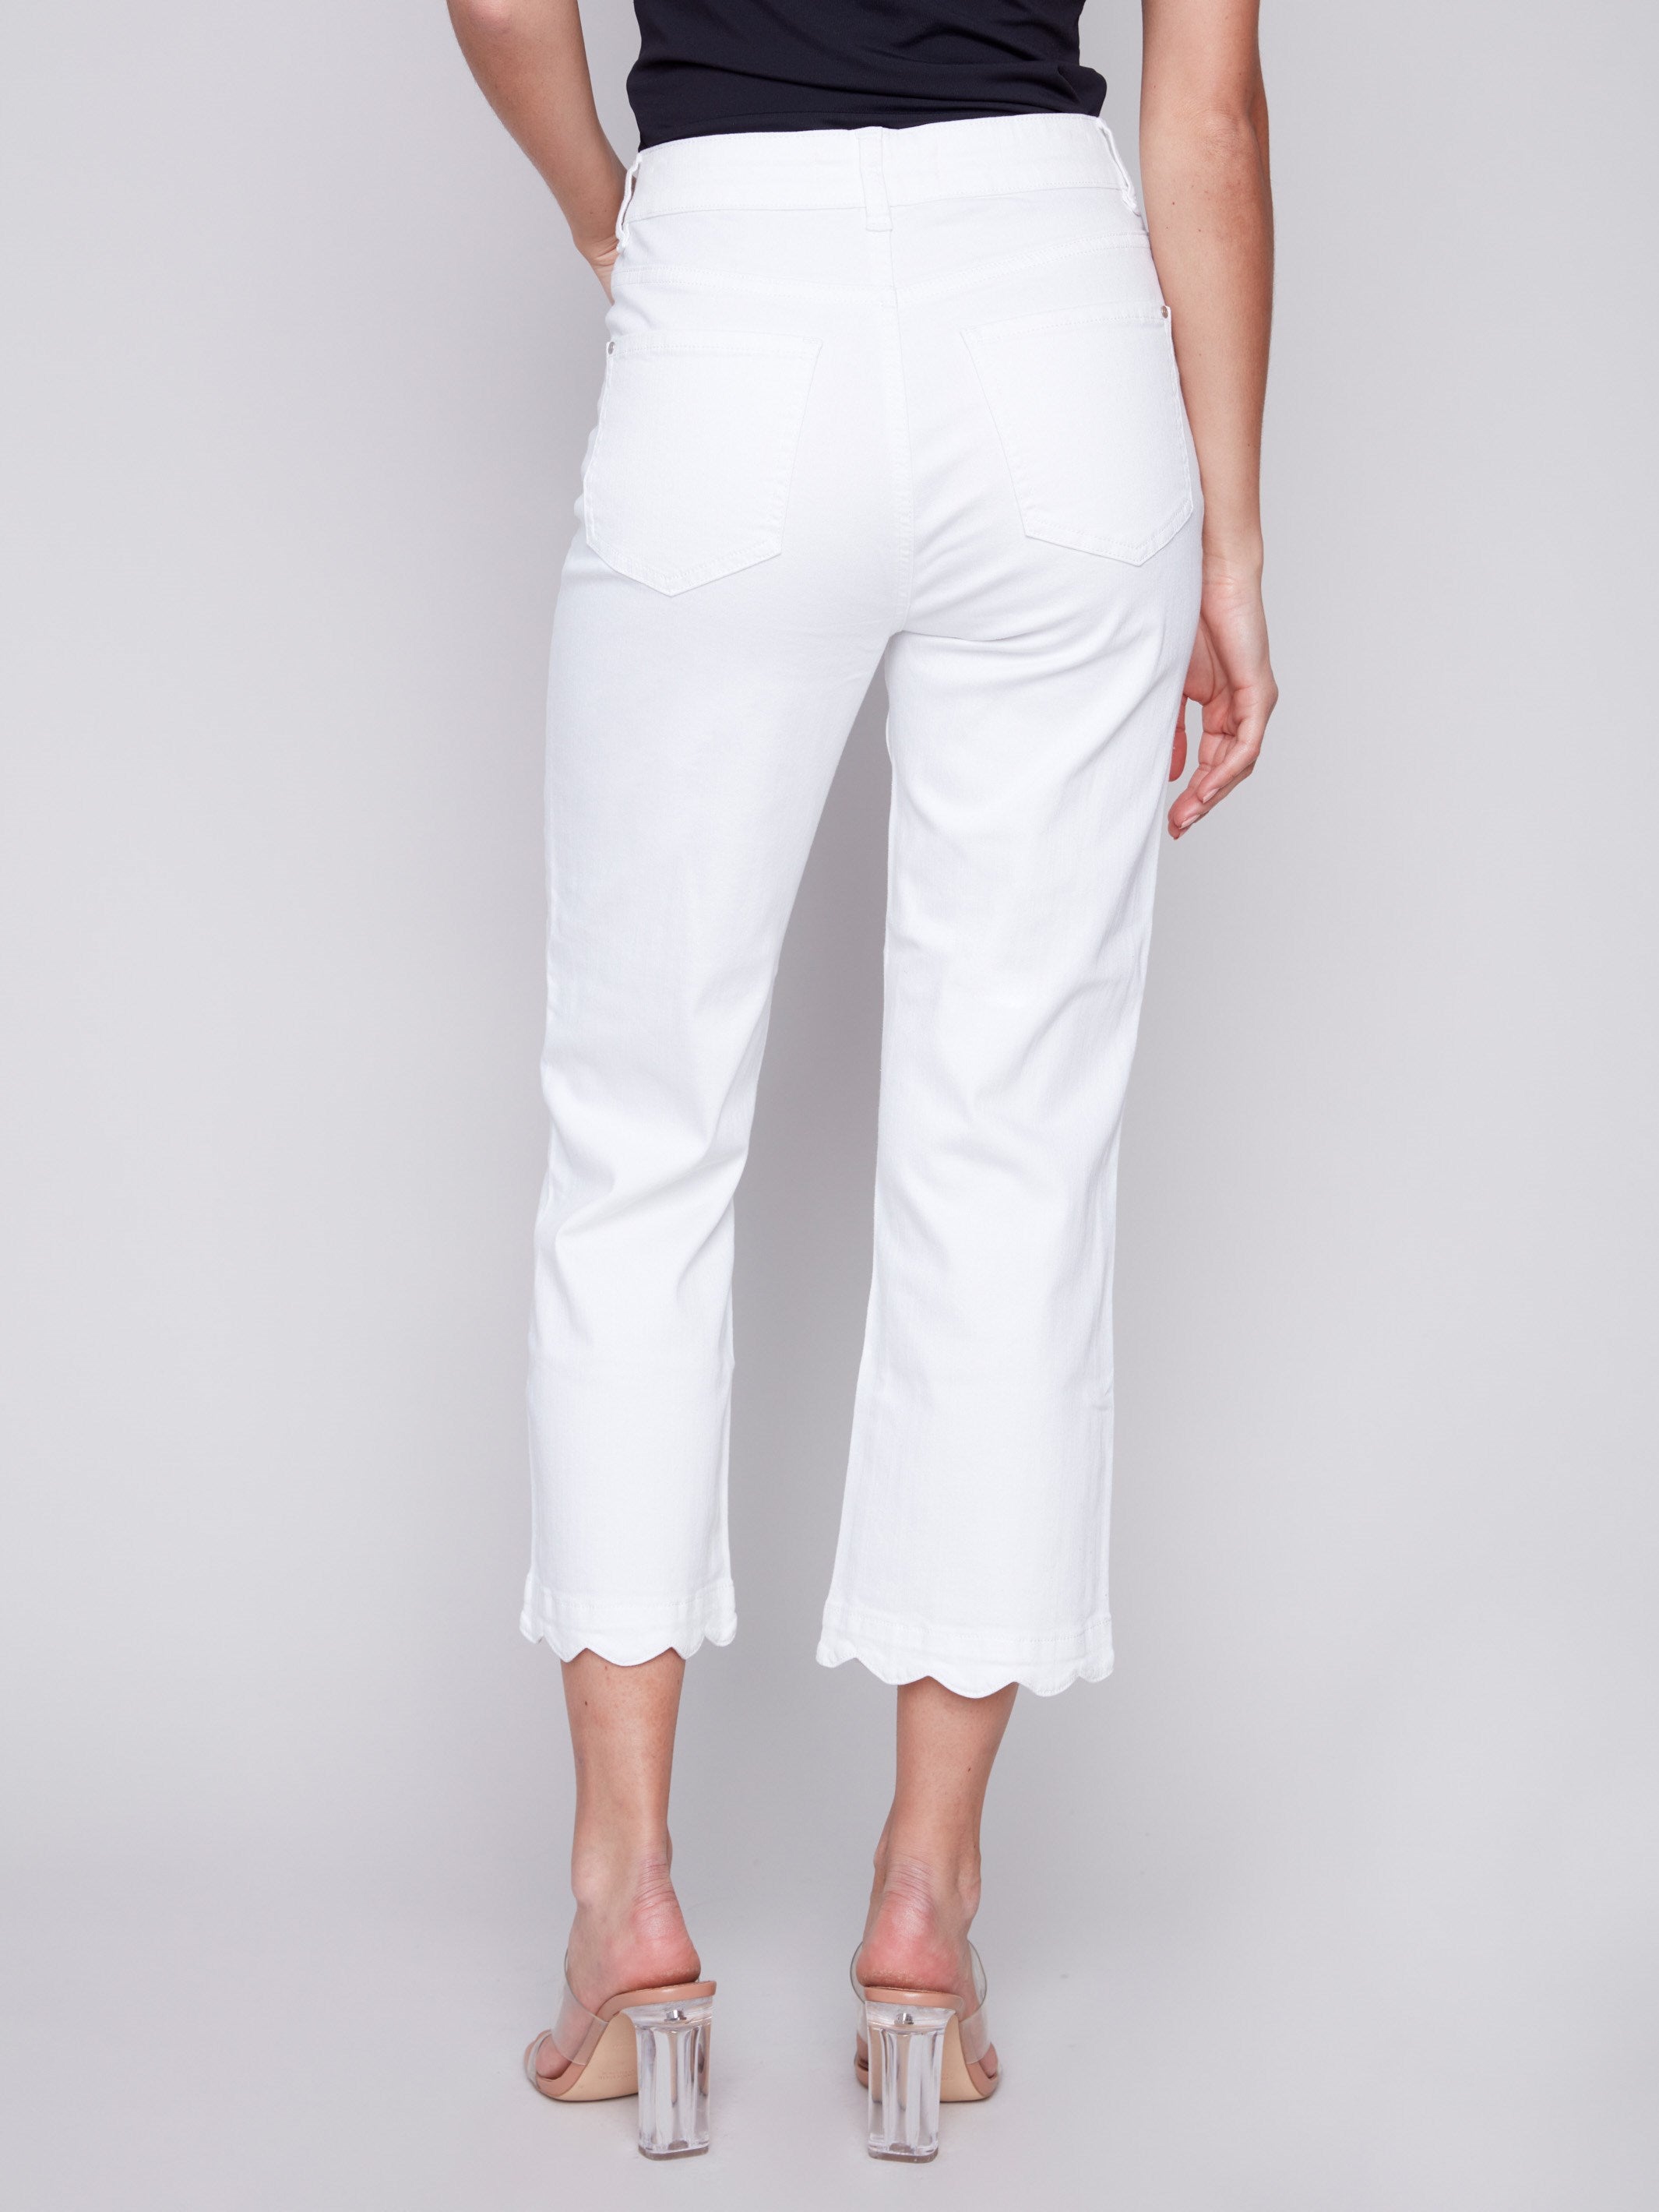 Charlie B Straight Leg Twill Jeans with Scallop Hem - White - Image 3